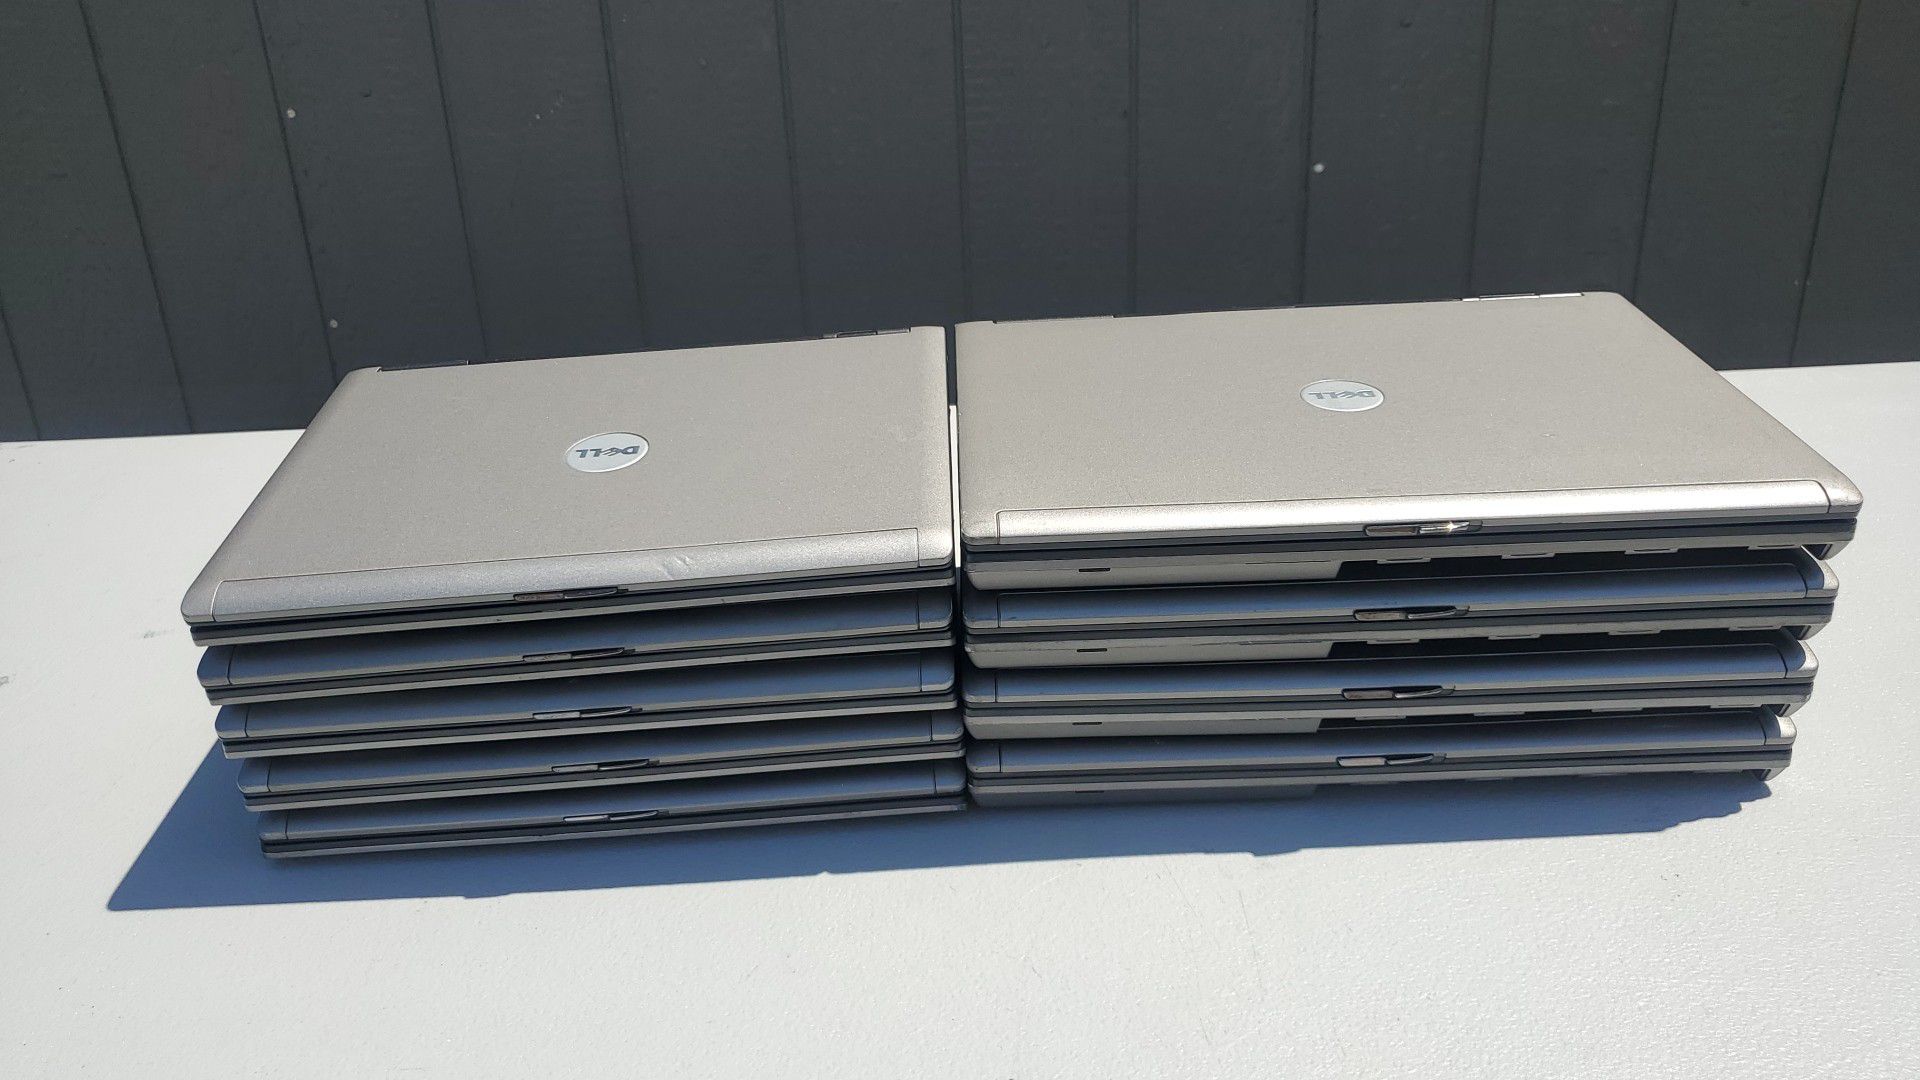 Lot of 9 Dell laptops incomplete for repair or parts 🤔 sold AS-IS